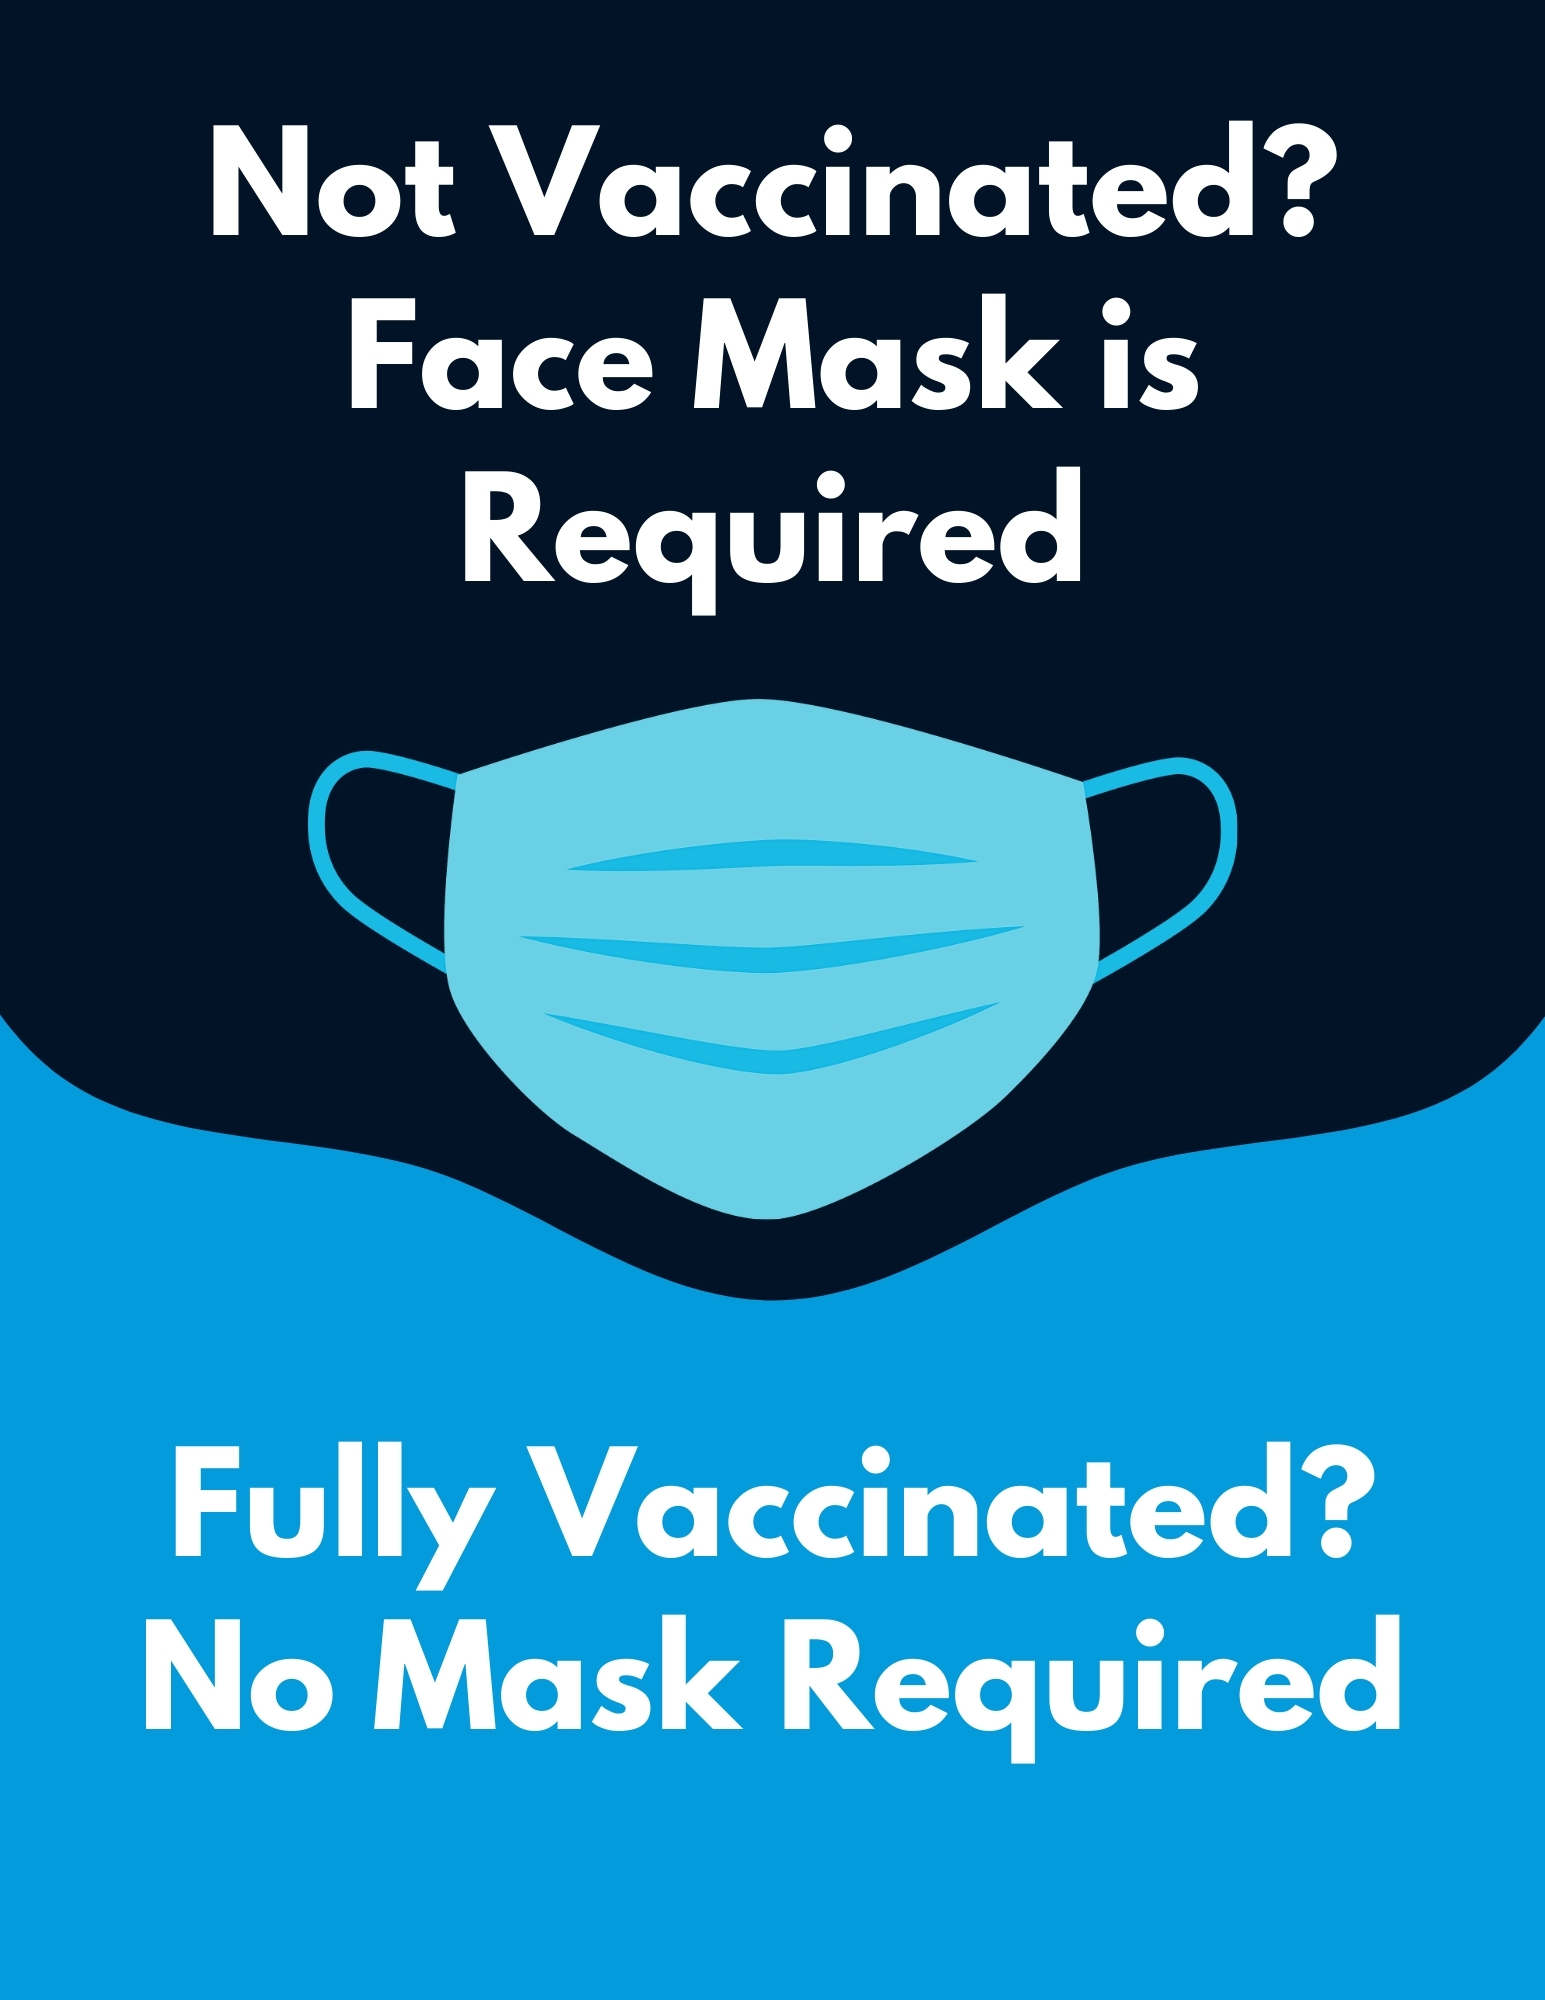 Blue Face Mask Flyer for Vax and Not vax